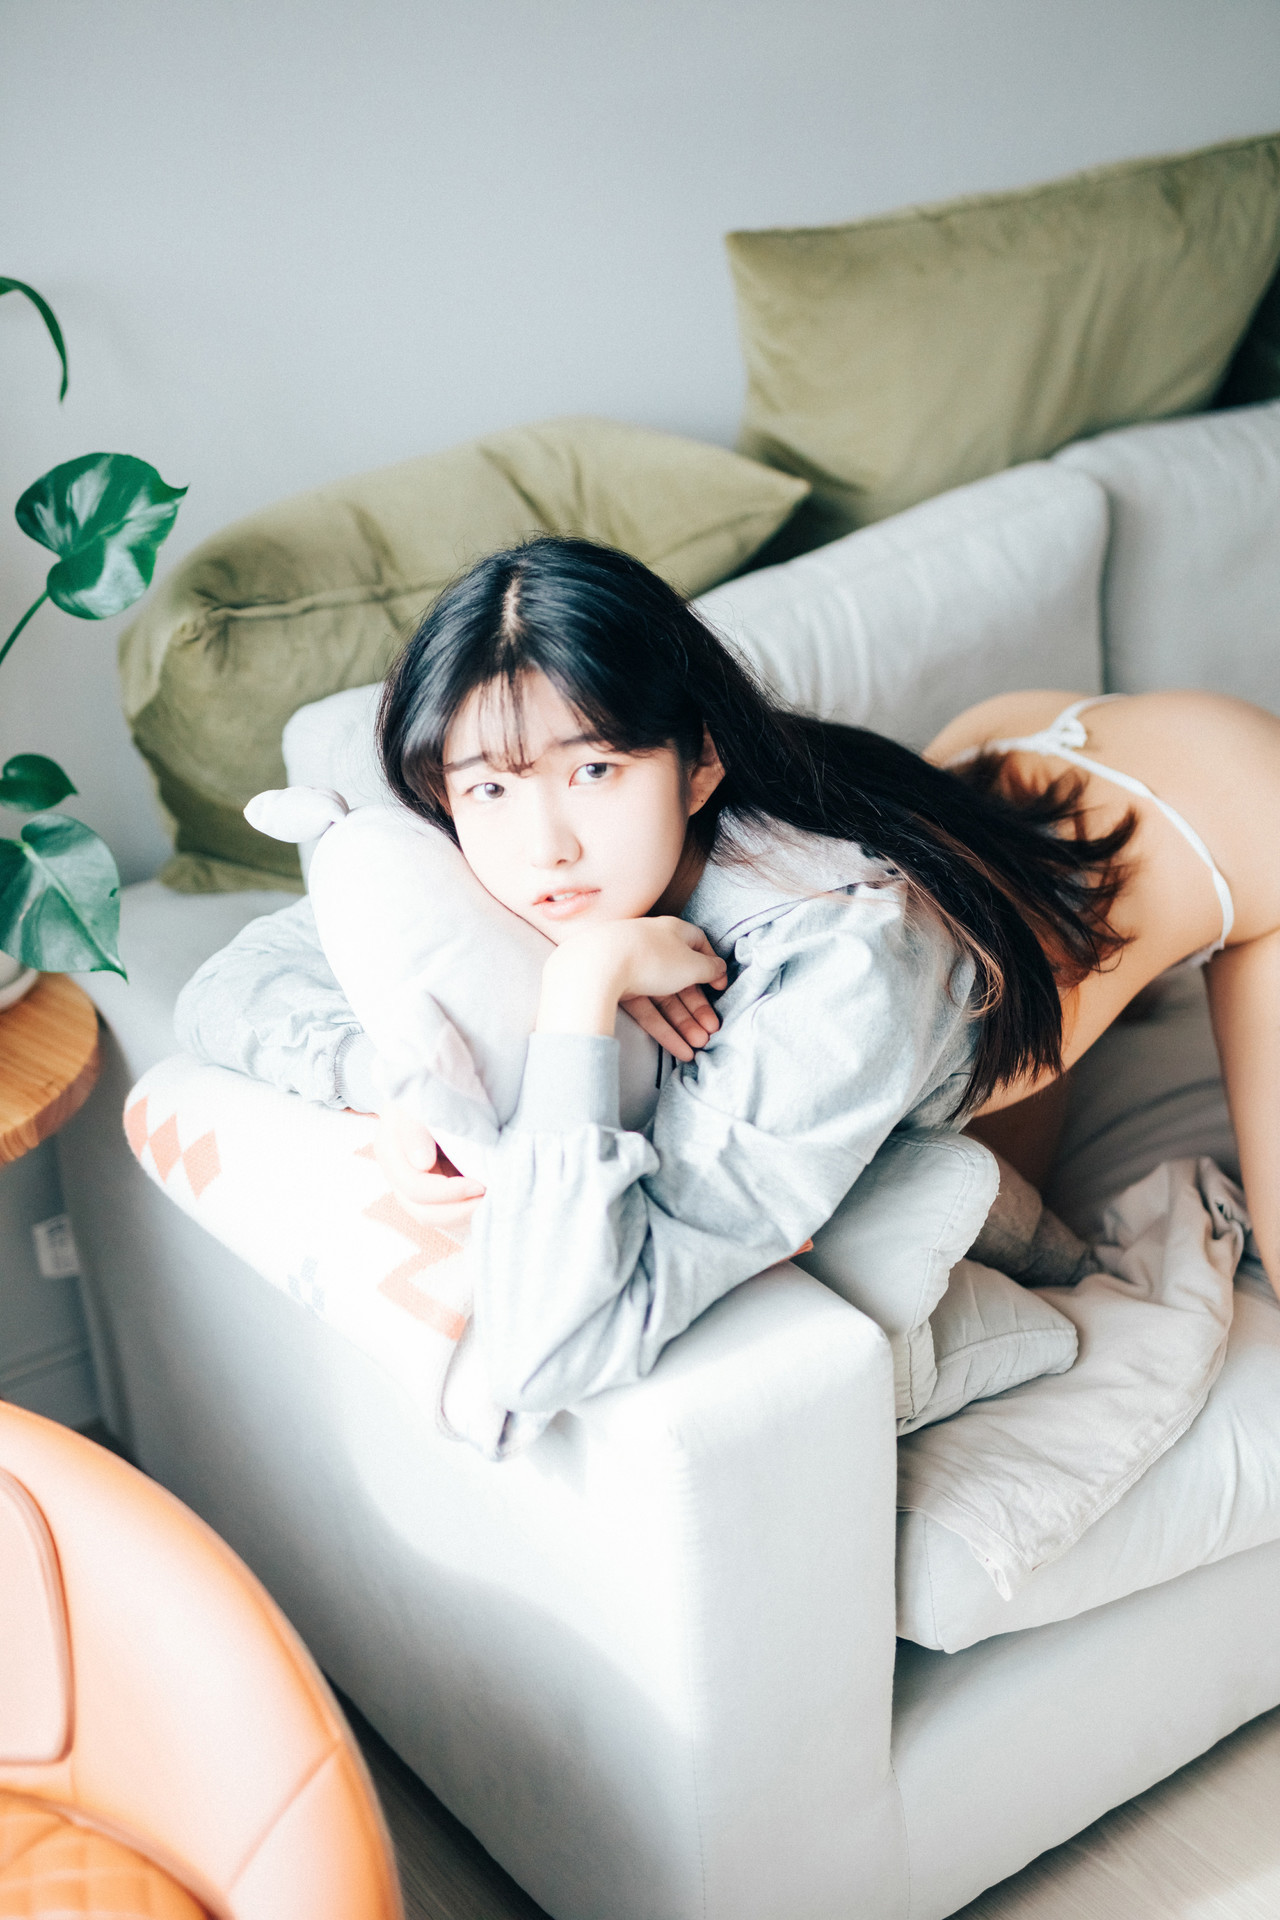 Sonson 손손, [Loozy] Date at home (+S Ver) Set.01(11)